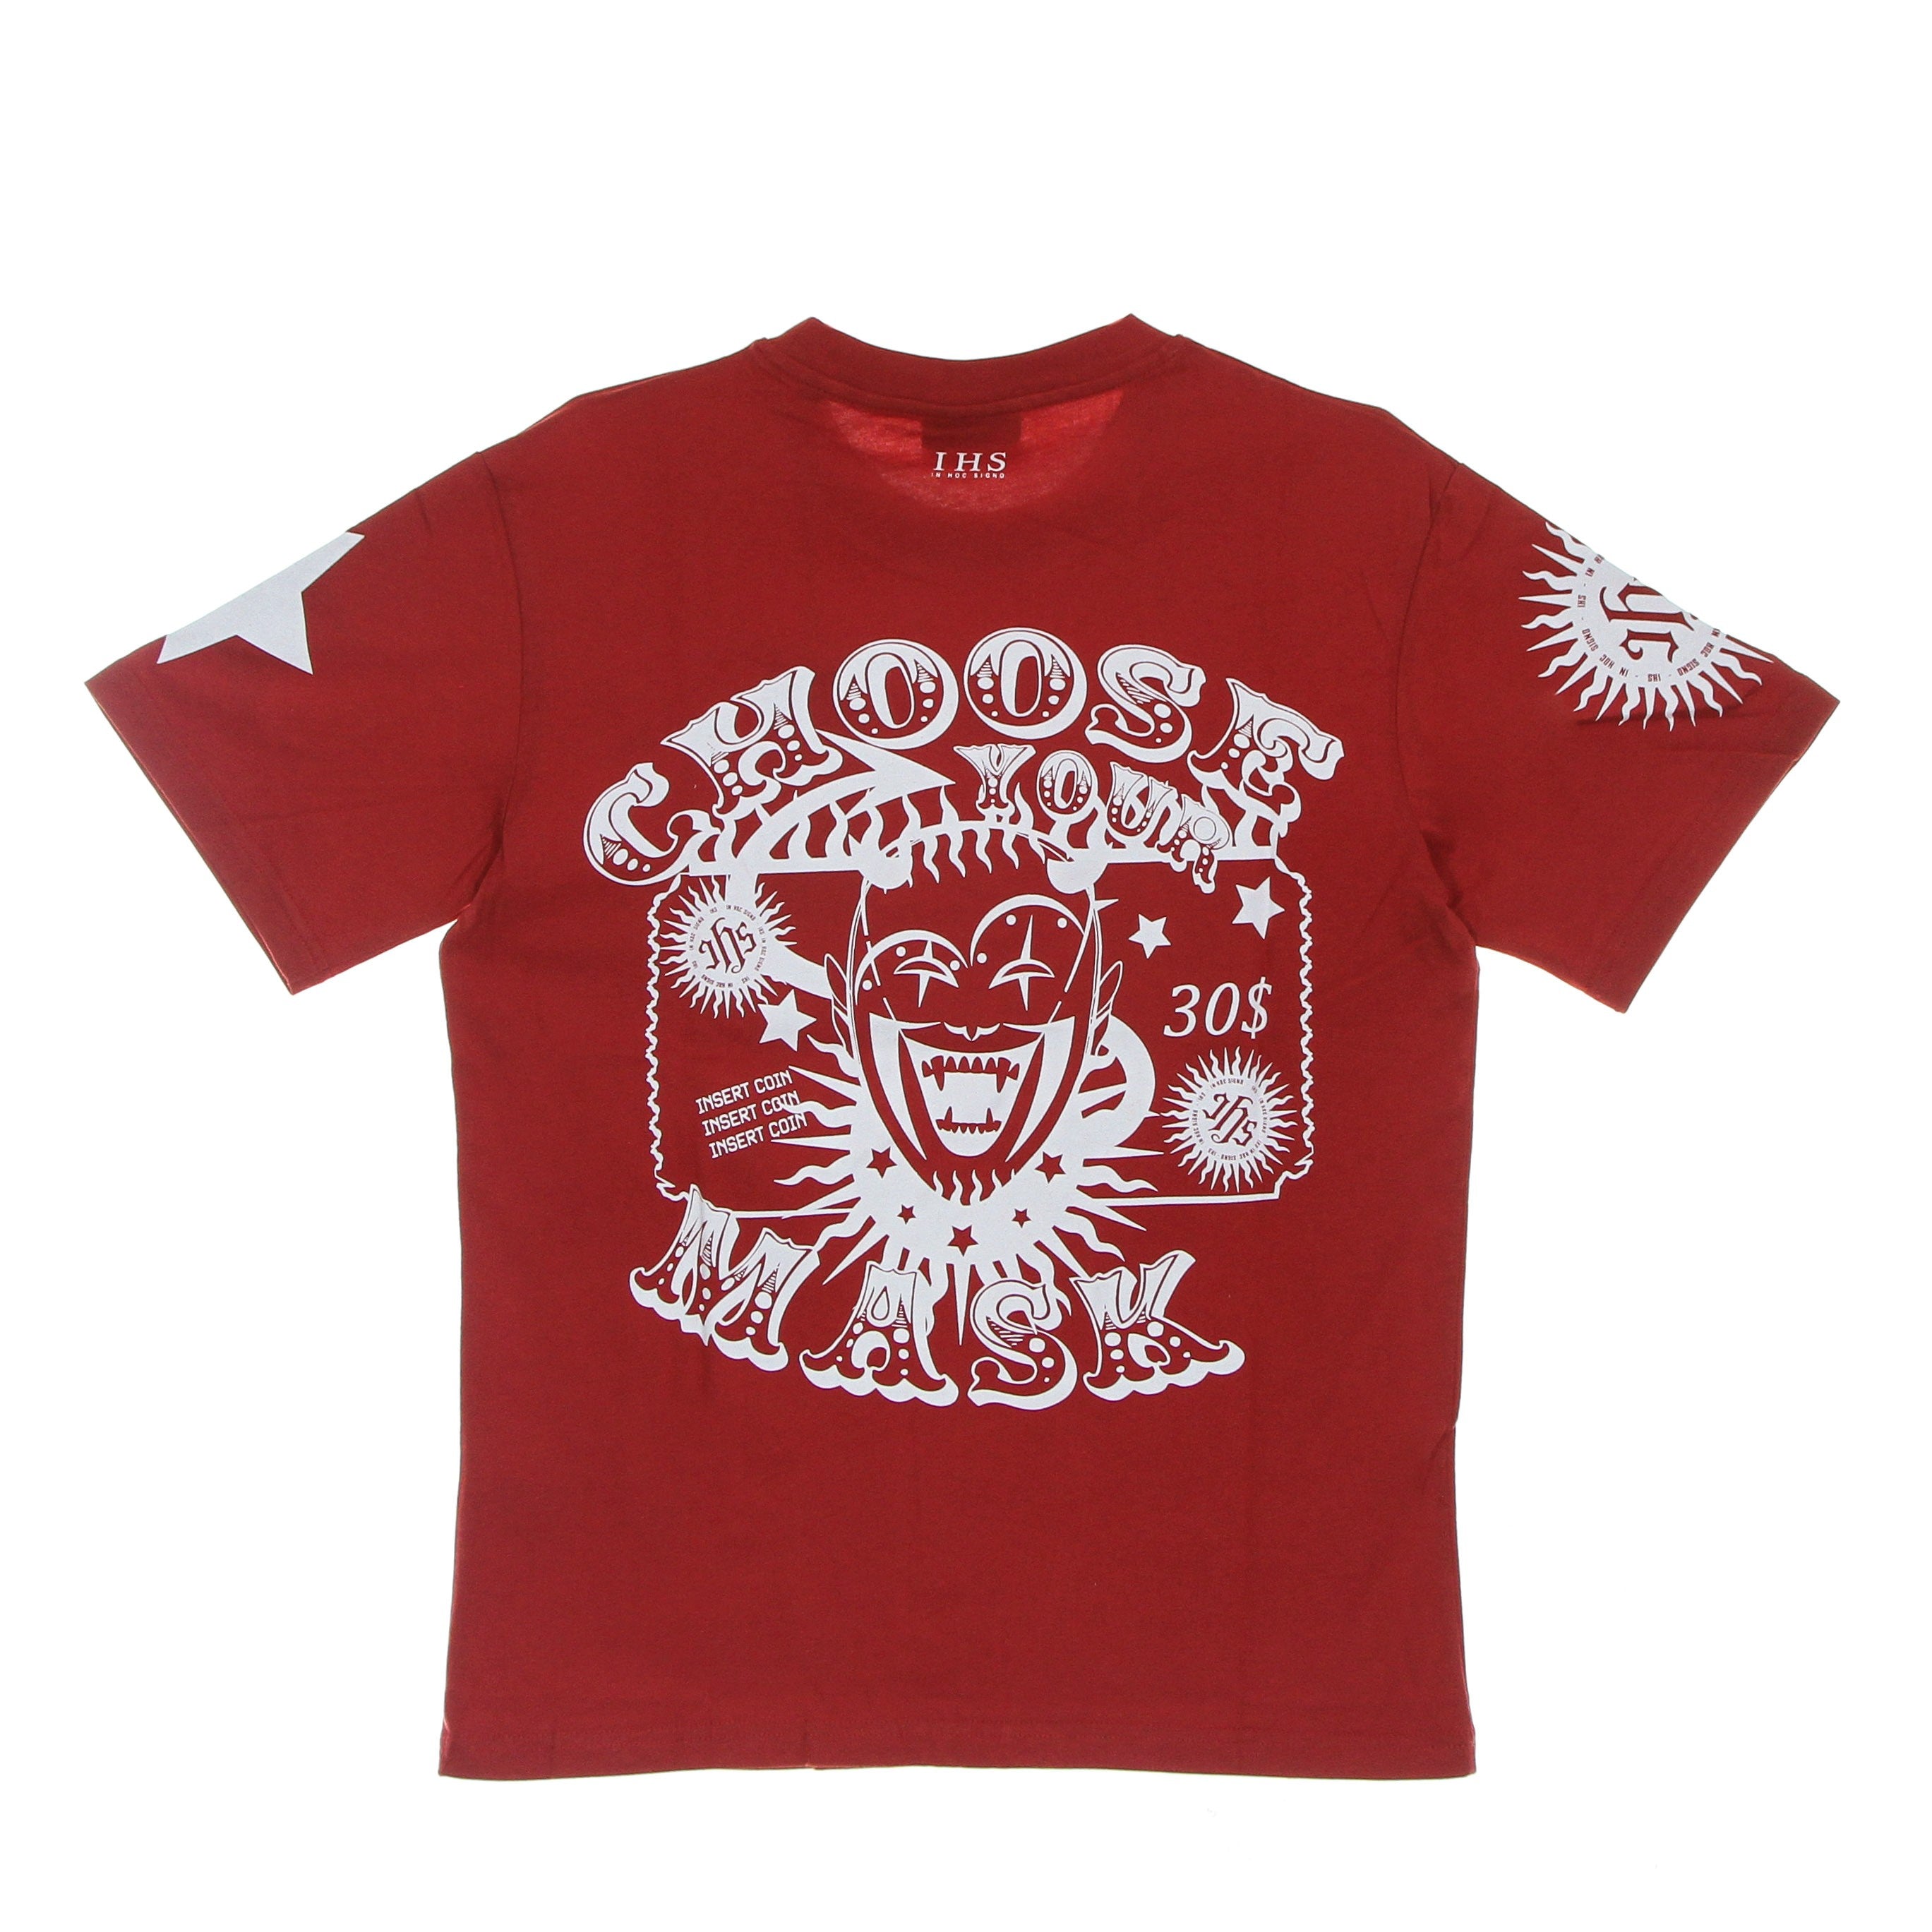 Ihs, Maglietta Uomo Choose Your Mask Tee, Red